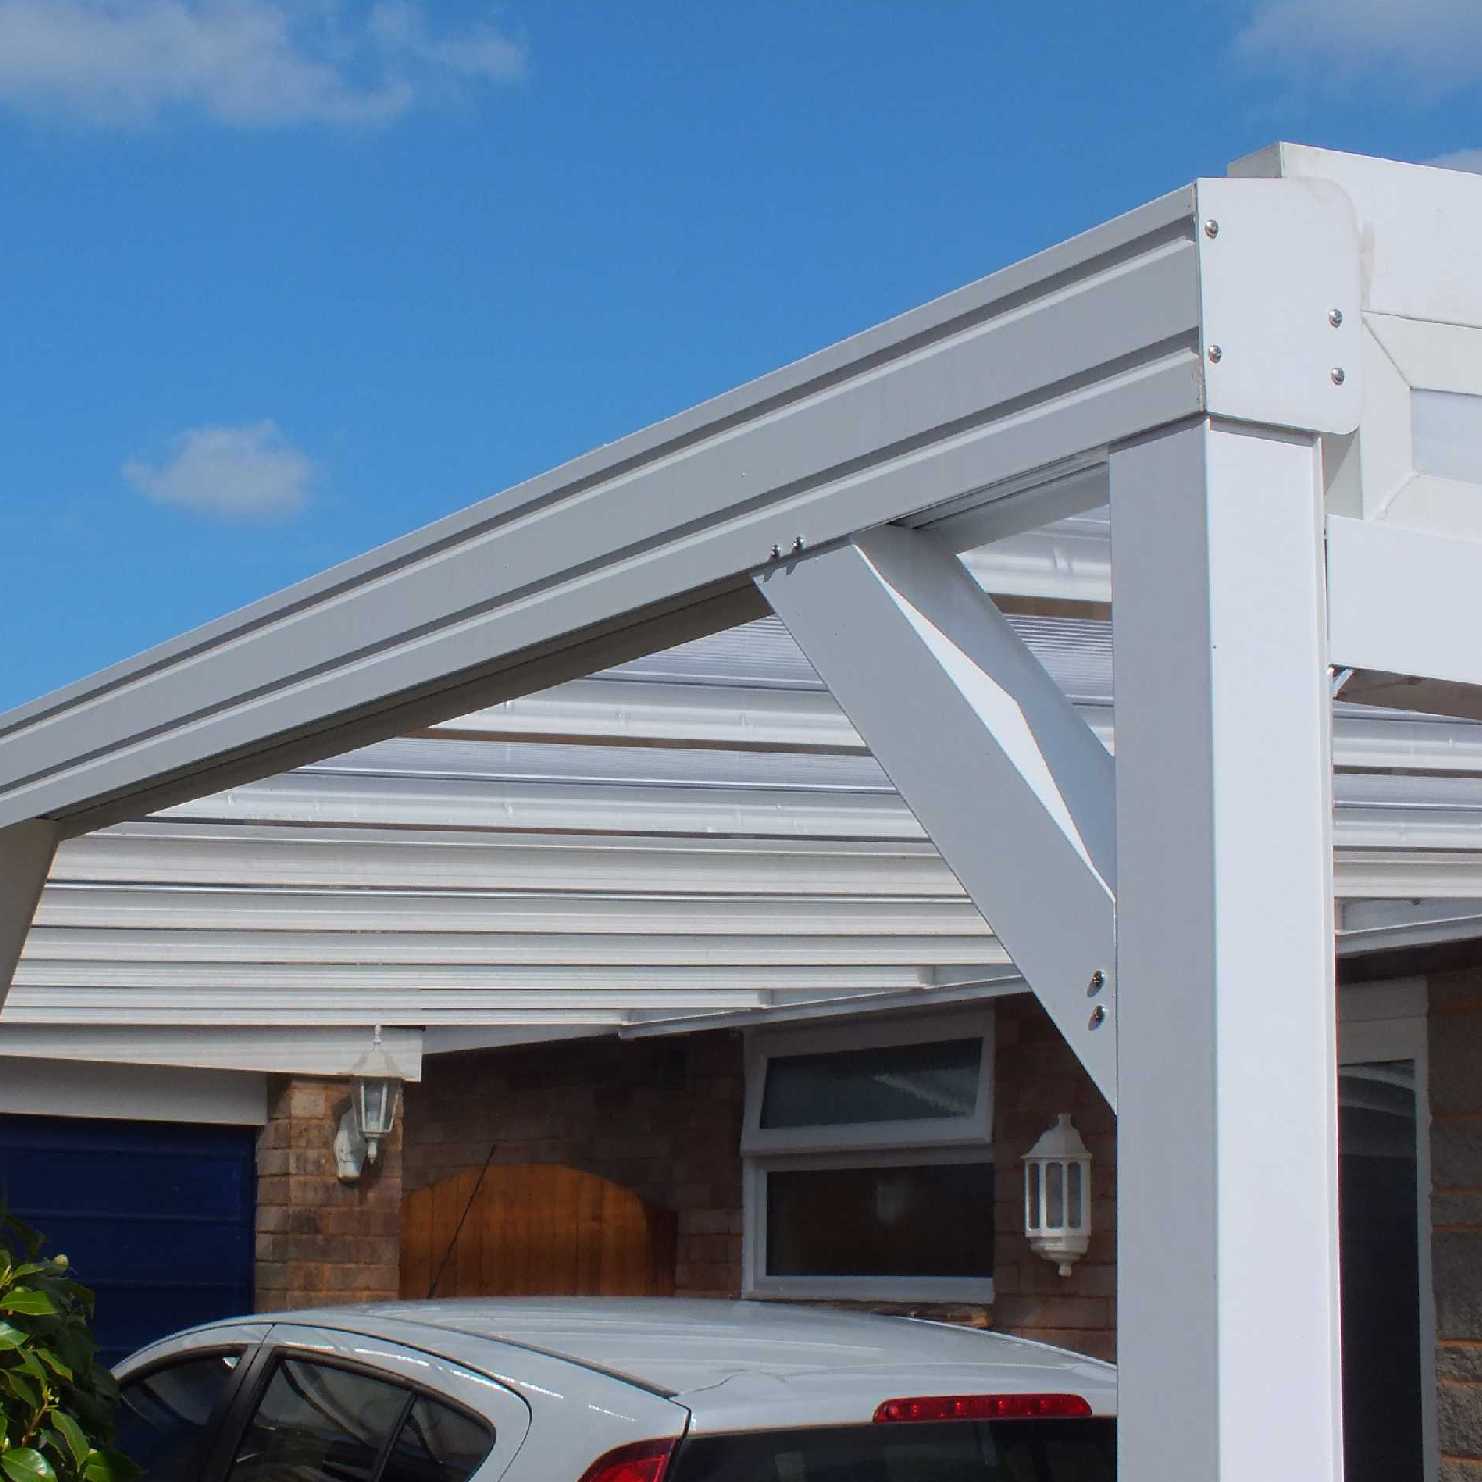 Great deals on Omega Smart Lean-To Canopy, White with 16mm Polycarbonate Glazing - 7.8m (W) x 3.5m (P), (4) Supporting Posts